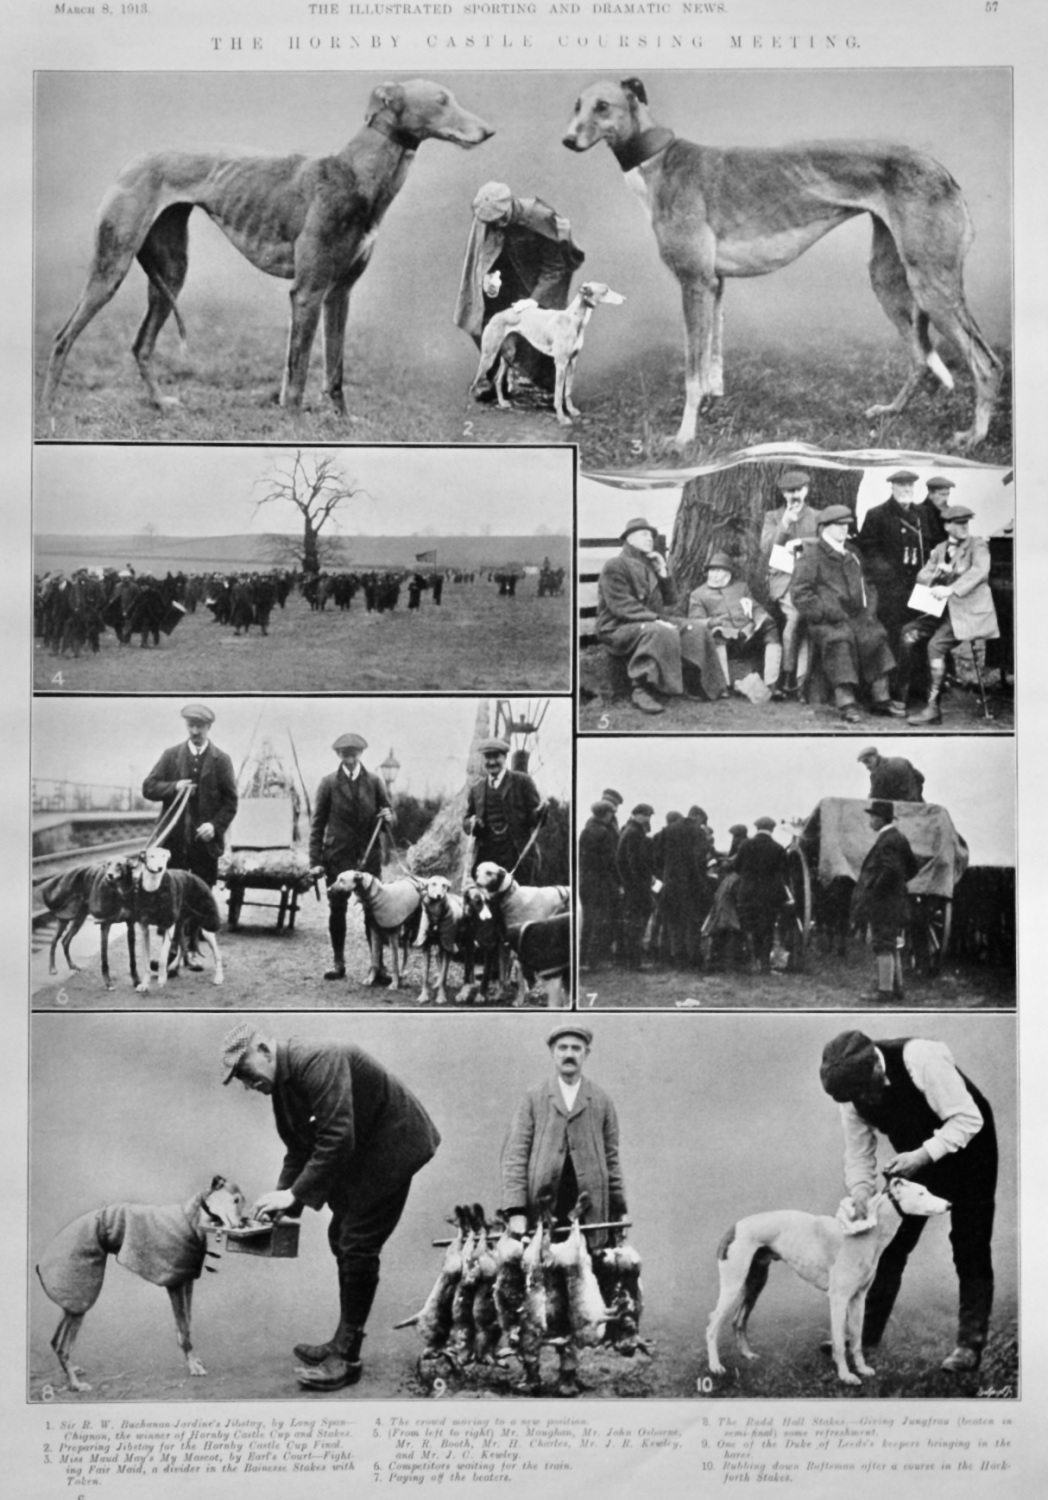 The Hornby Castle Coursing Meeting. 1913.